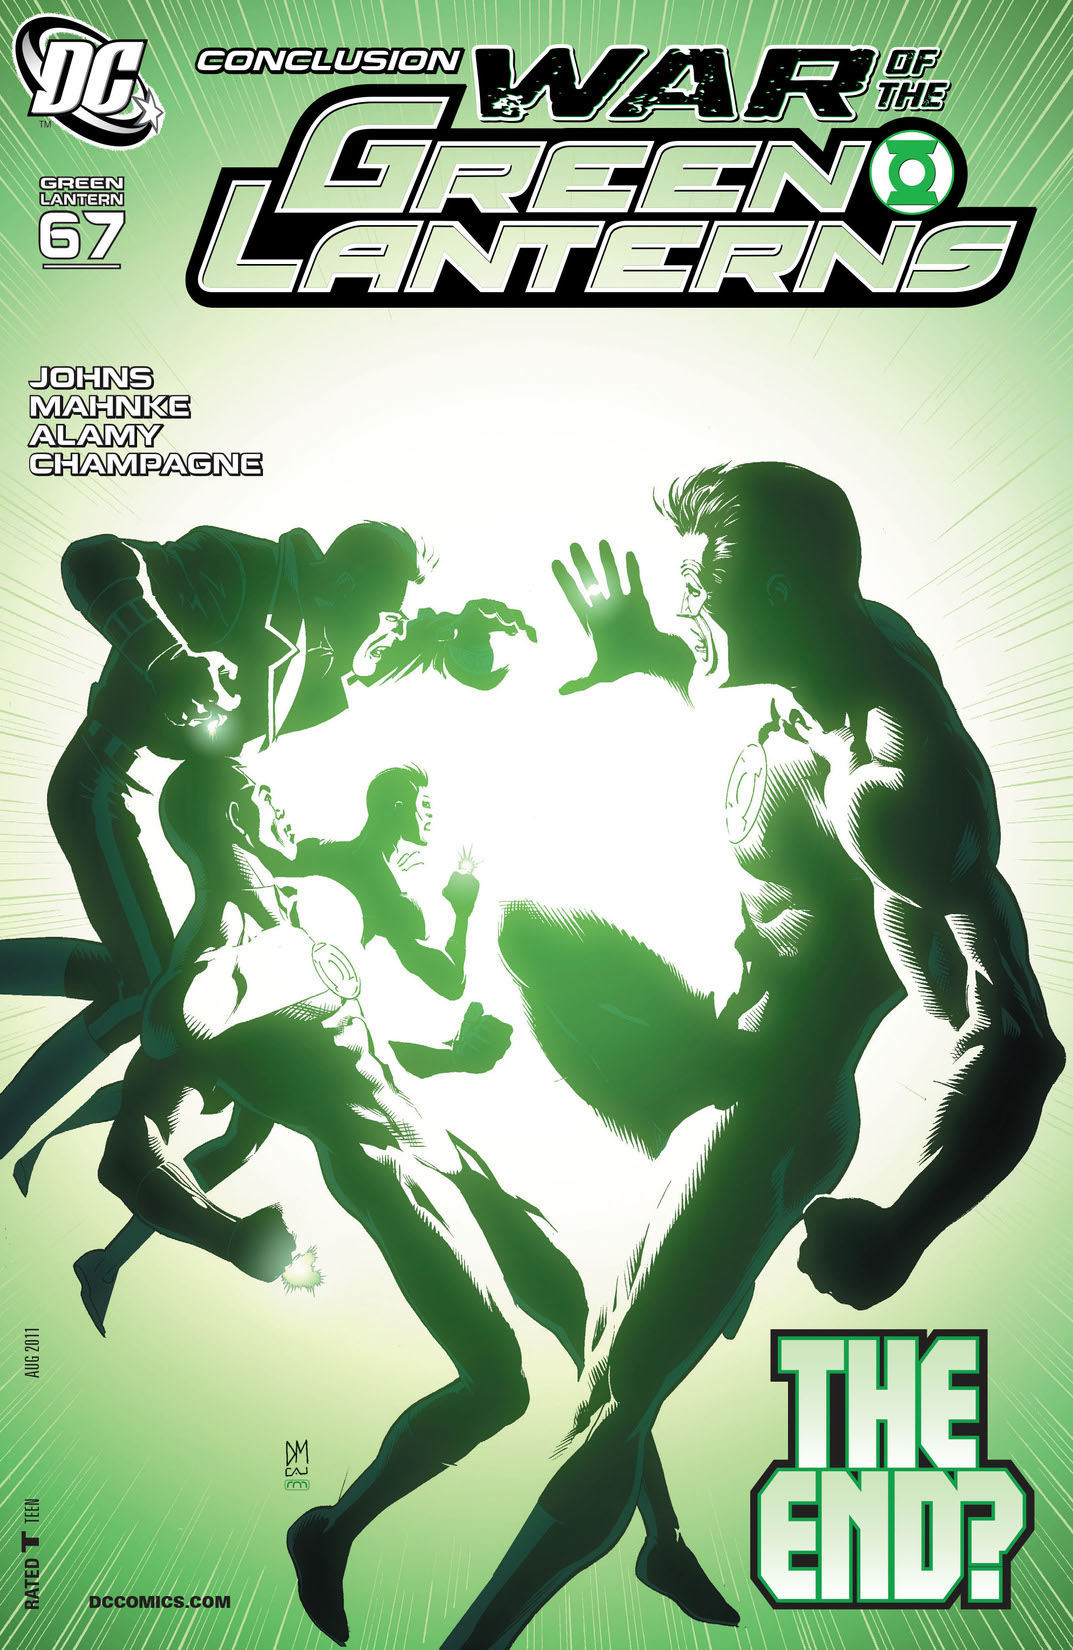 Green Lantern (2005-) #67 preview images